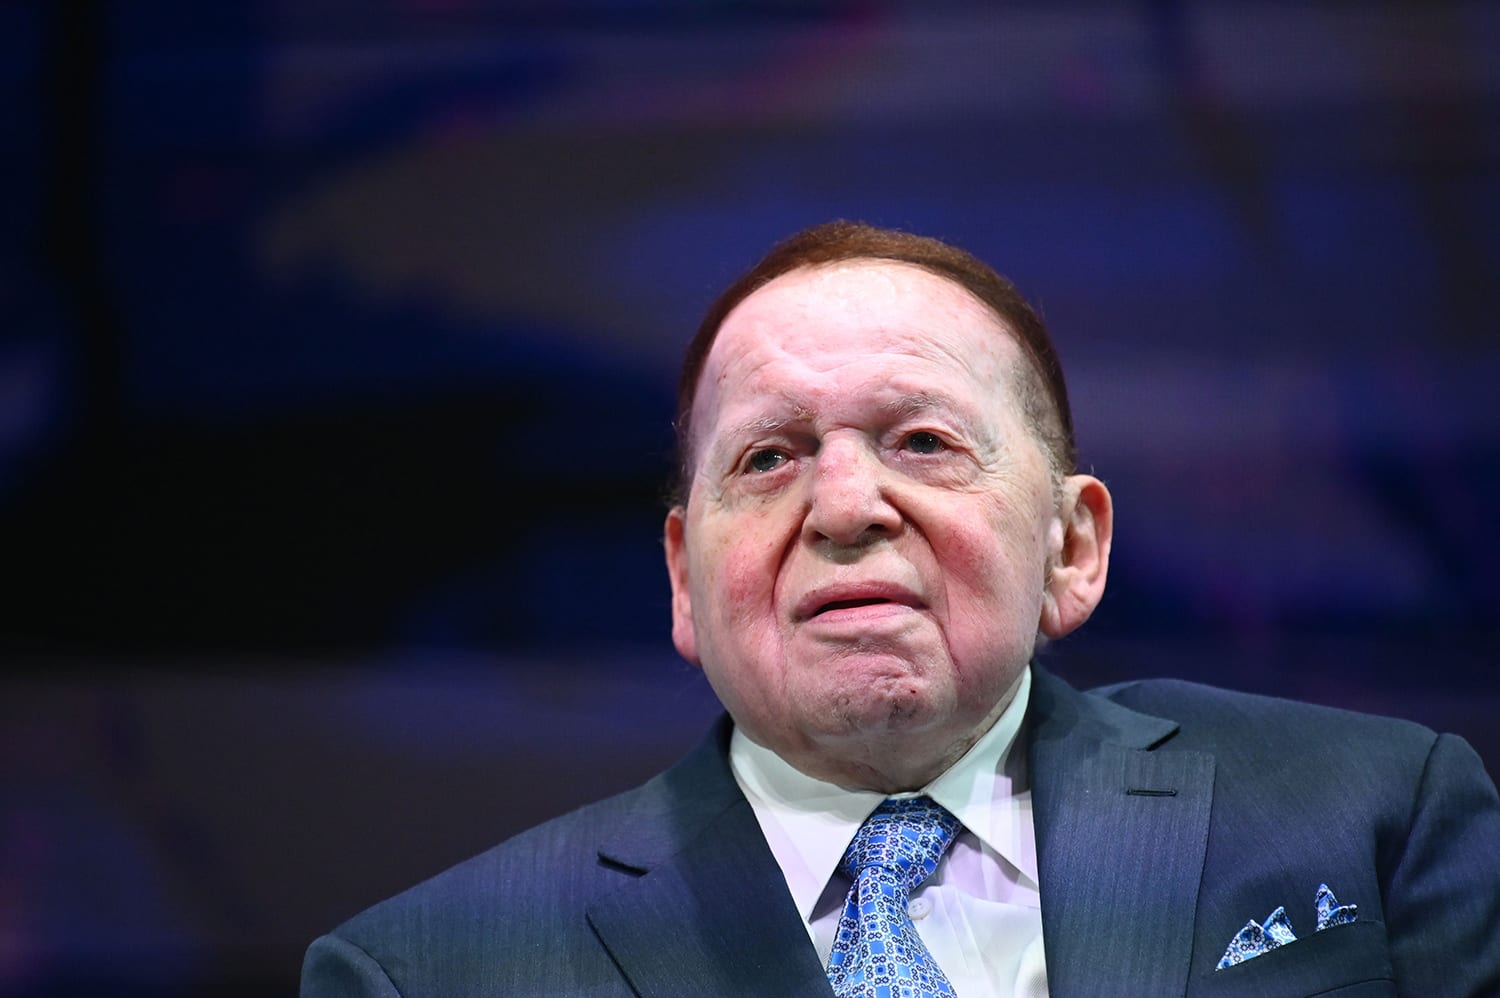 Sheldon Adelson dies at 87; Las Vegas Sands CEO, convention